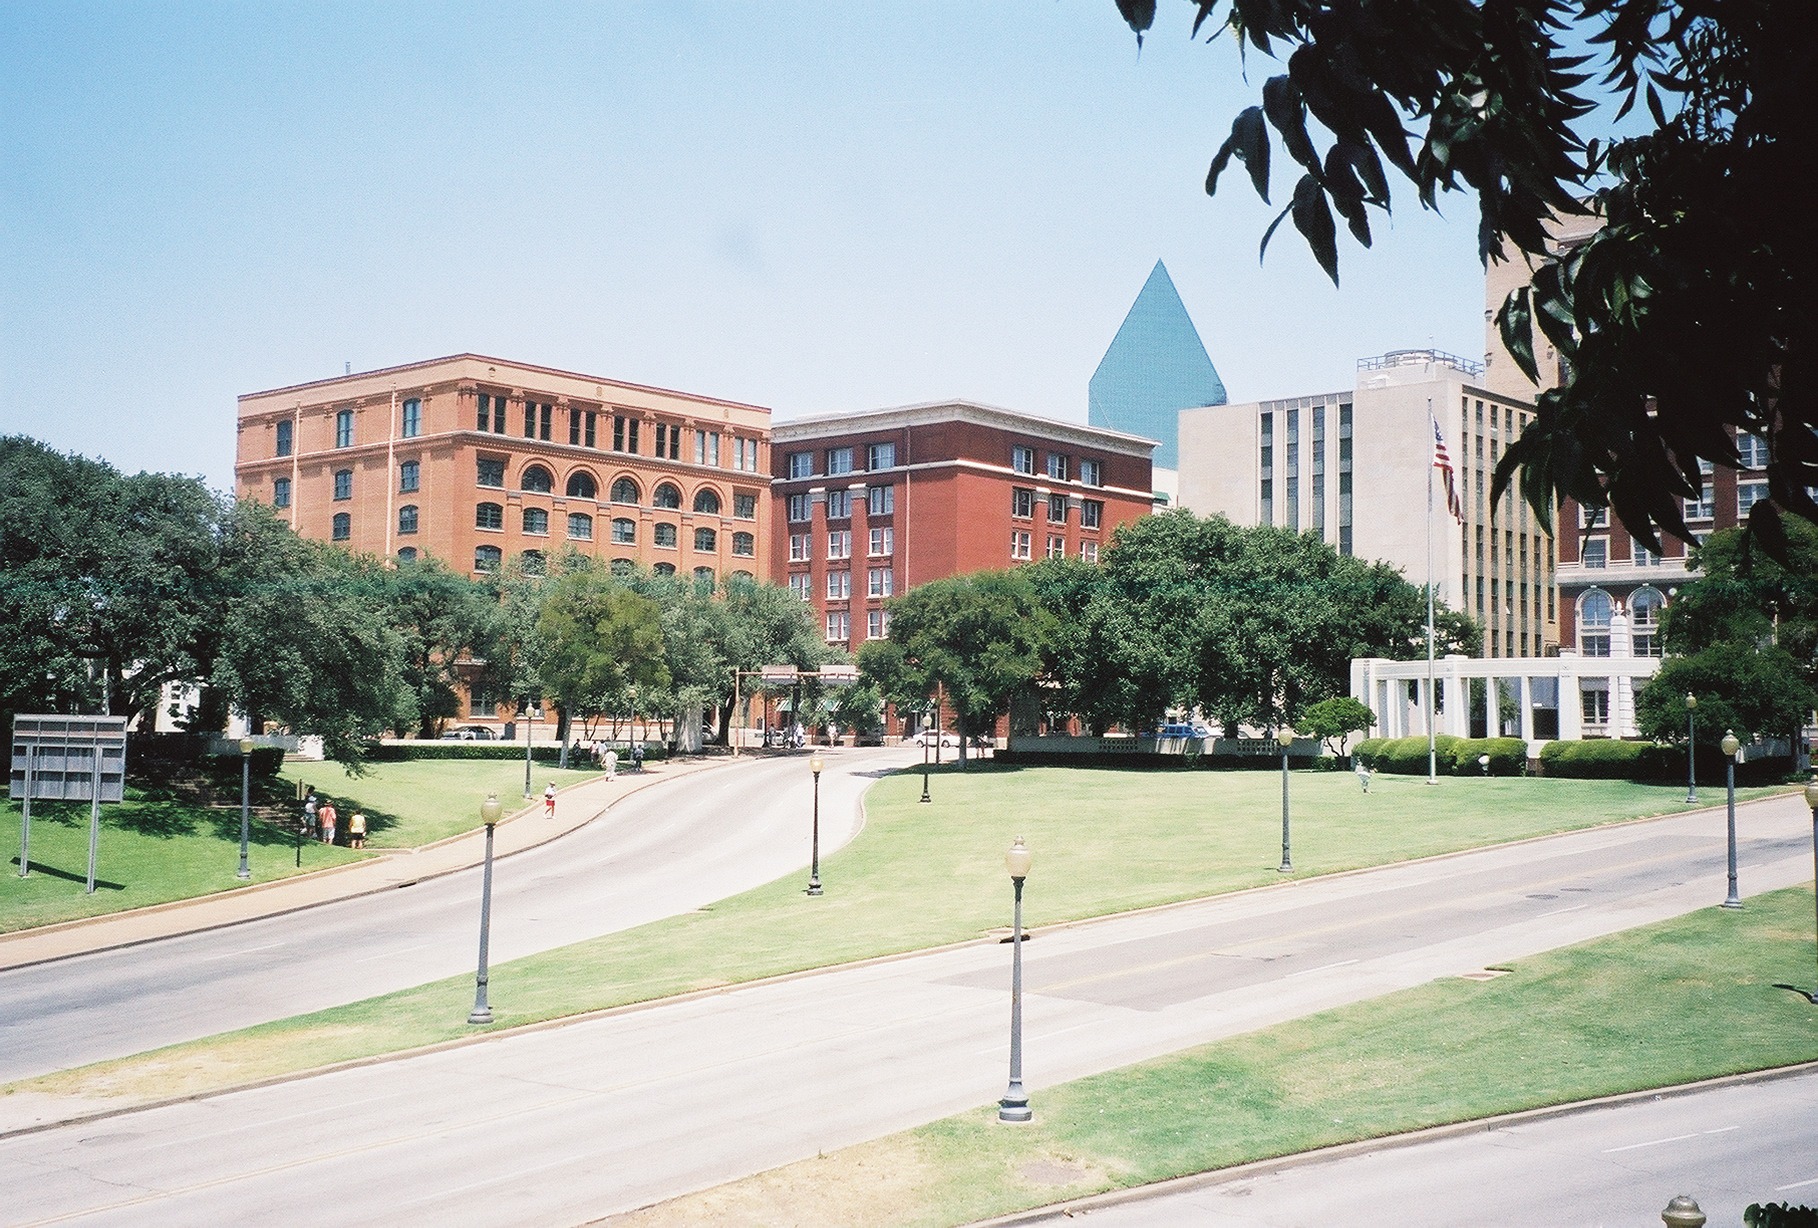 Dealey Plaza and the John F. Kennedy Assassination